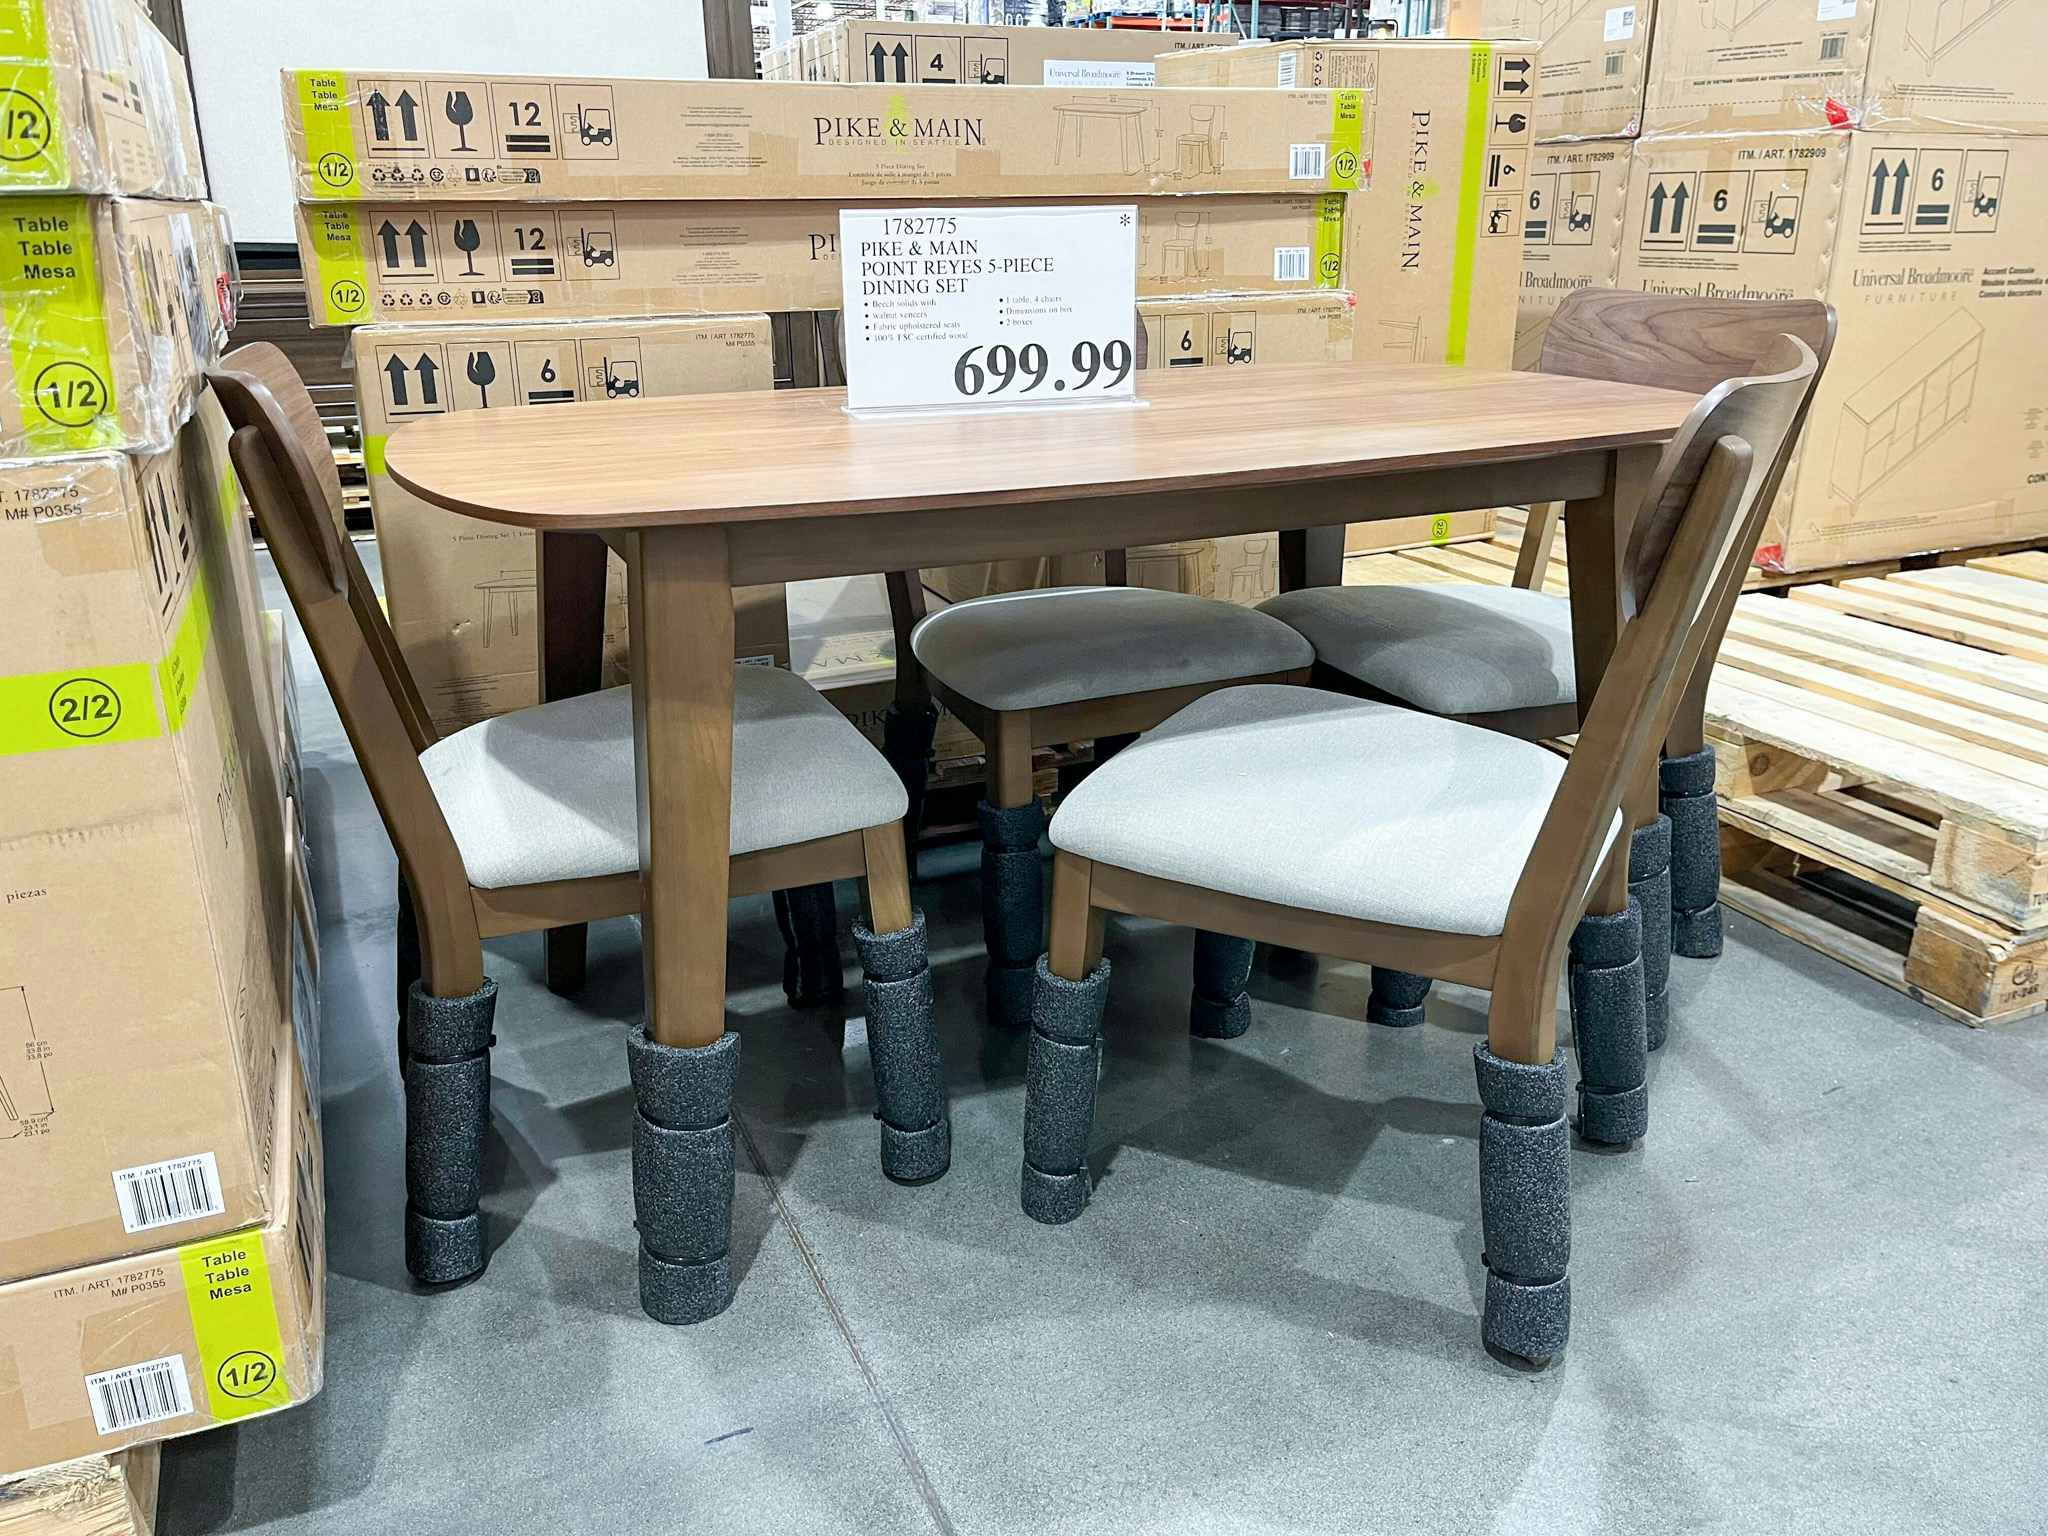 costco pike and main 5 piece dining set